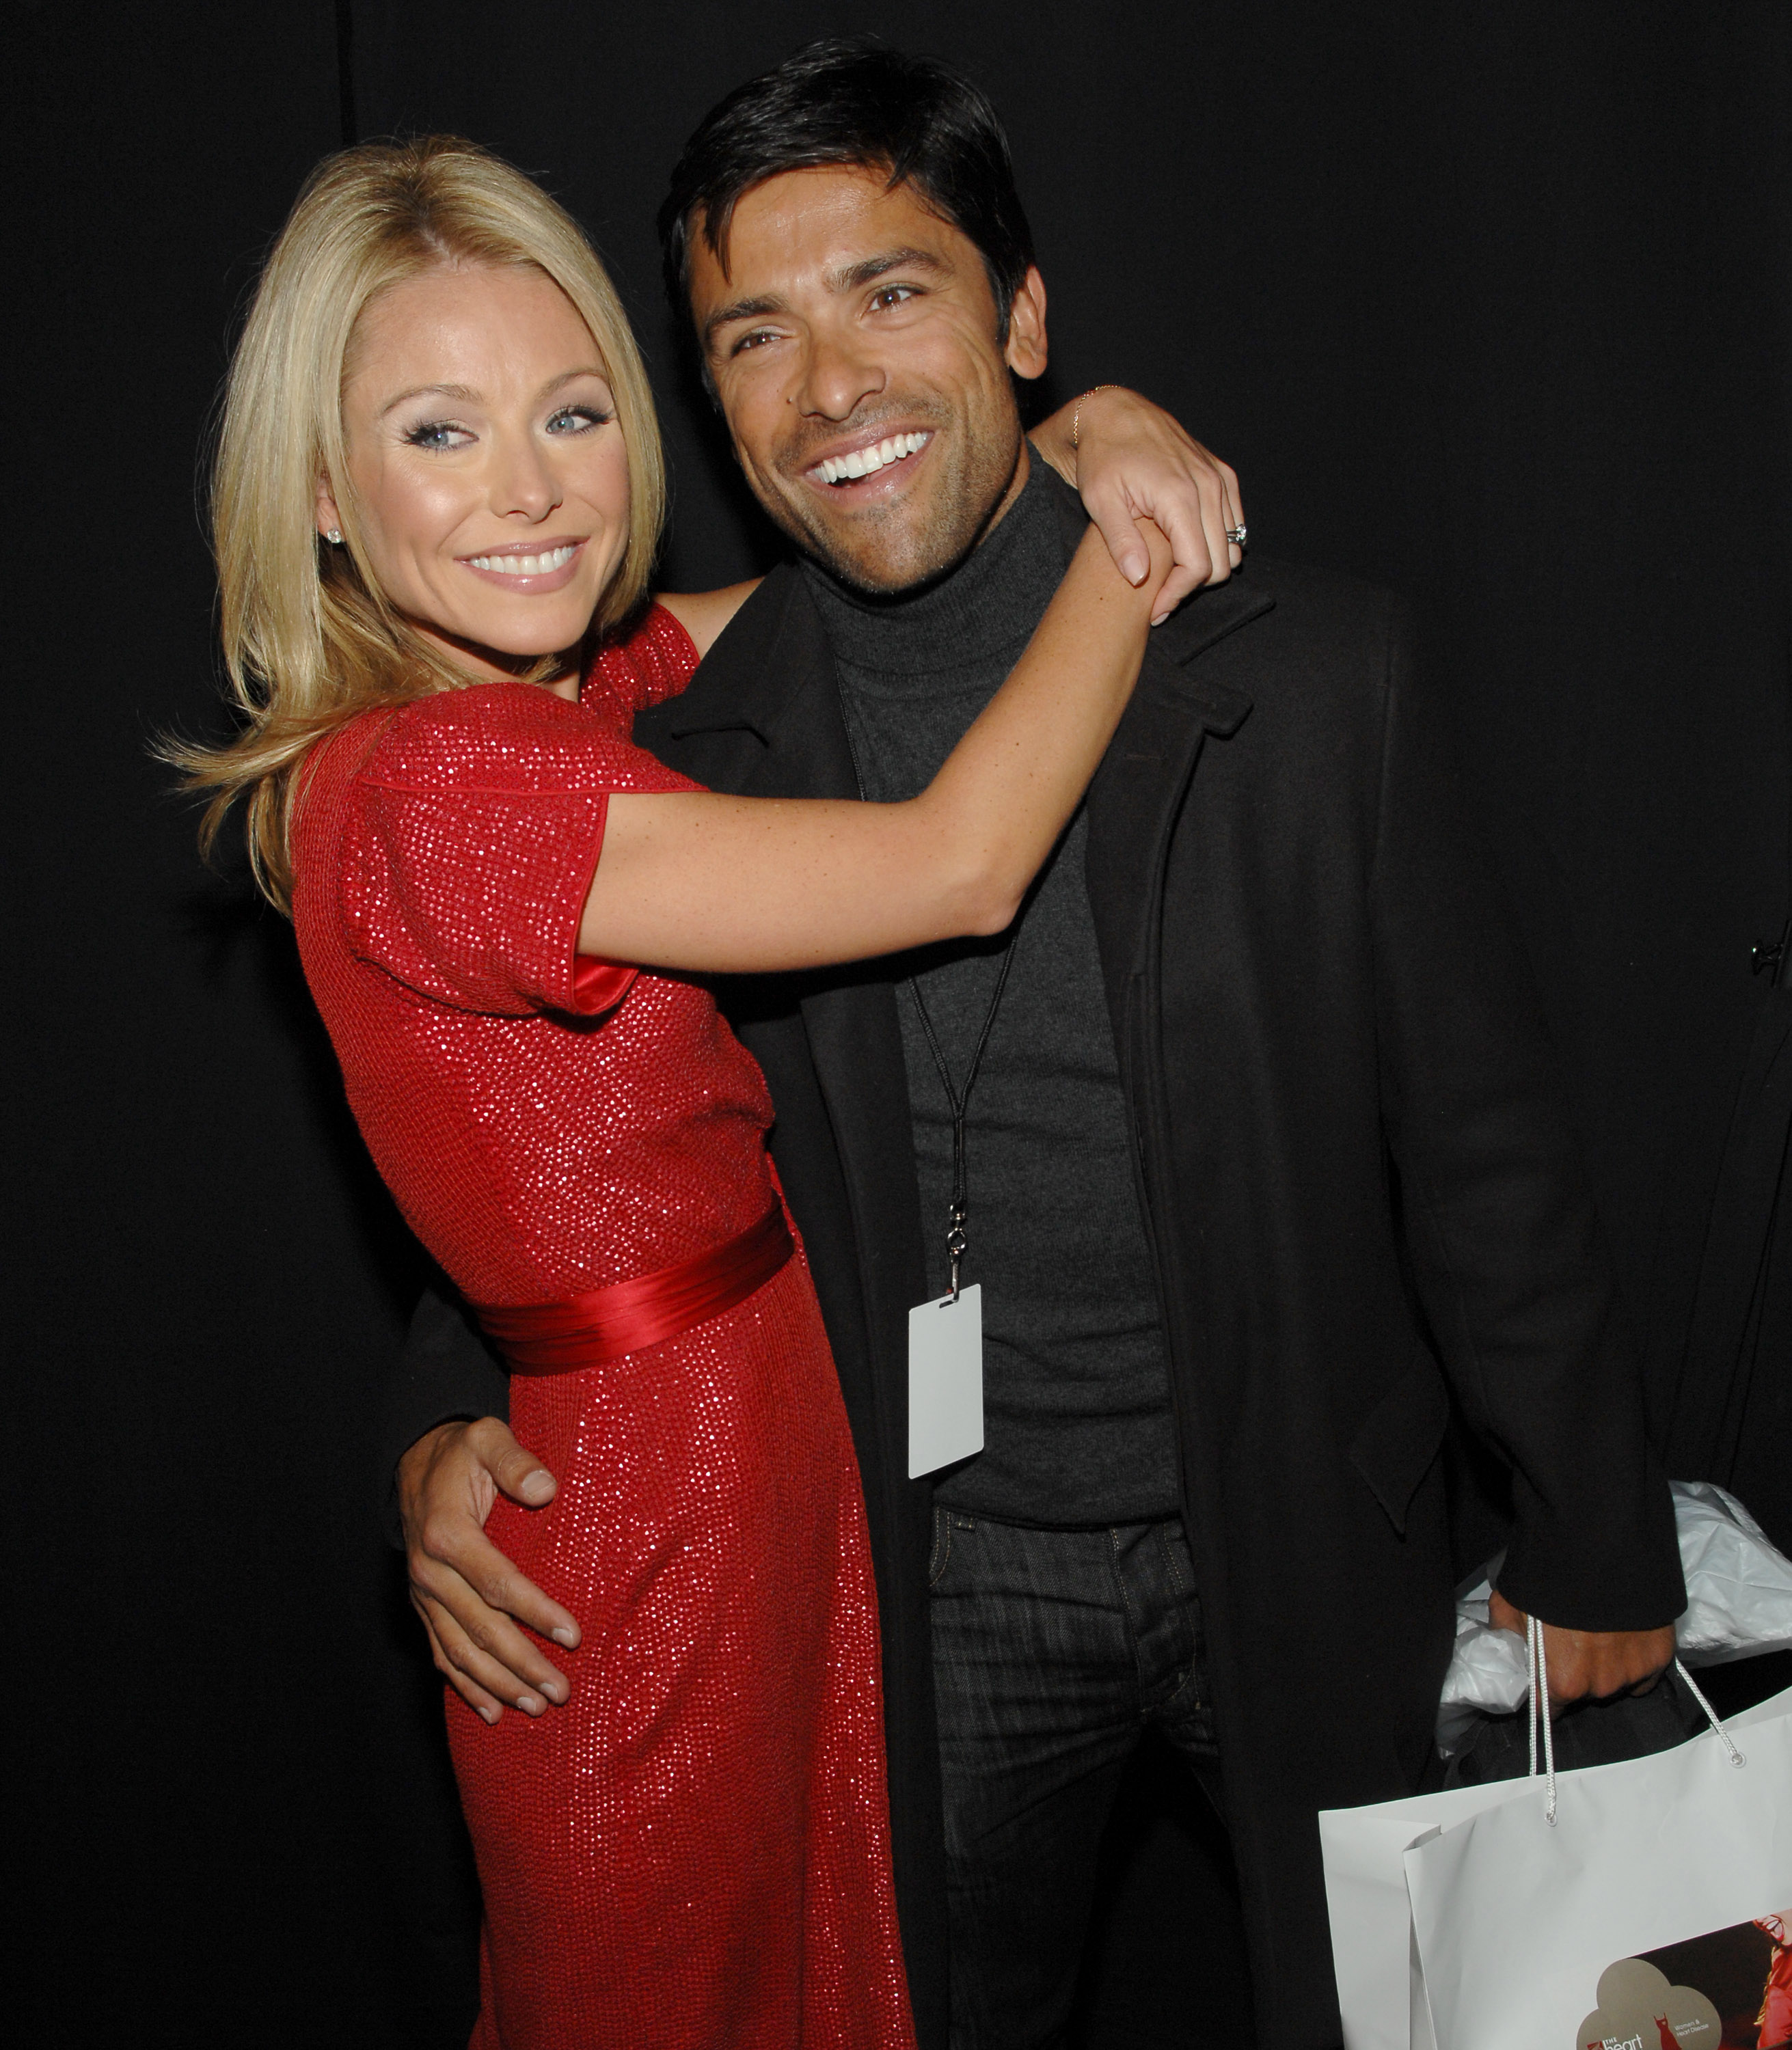 Kelly Ripa And Mark Consuelos Share Steamy Kiss In Adorable Throwback